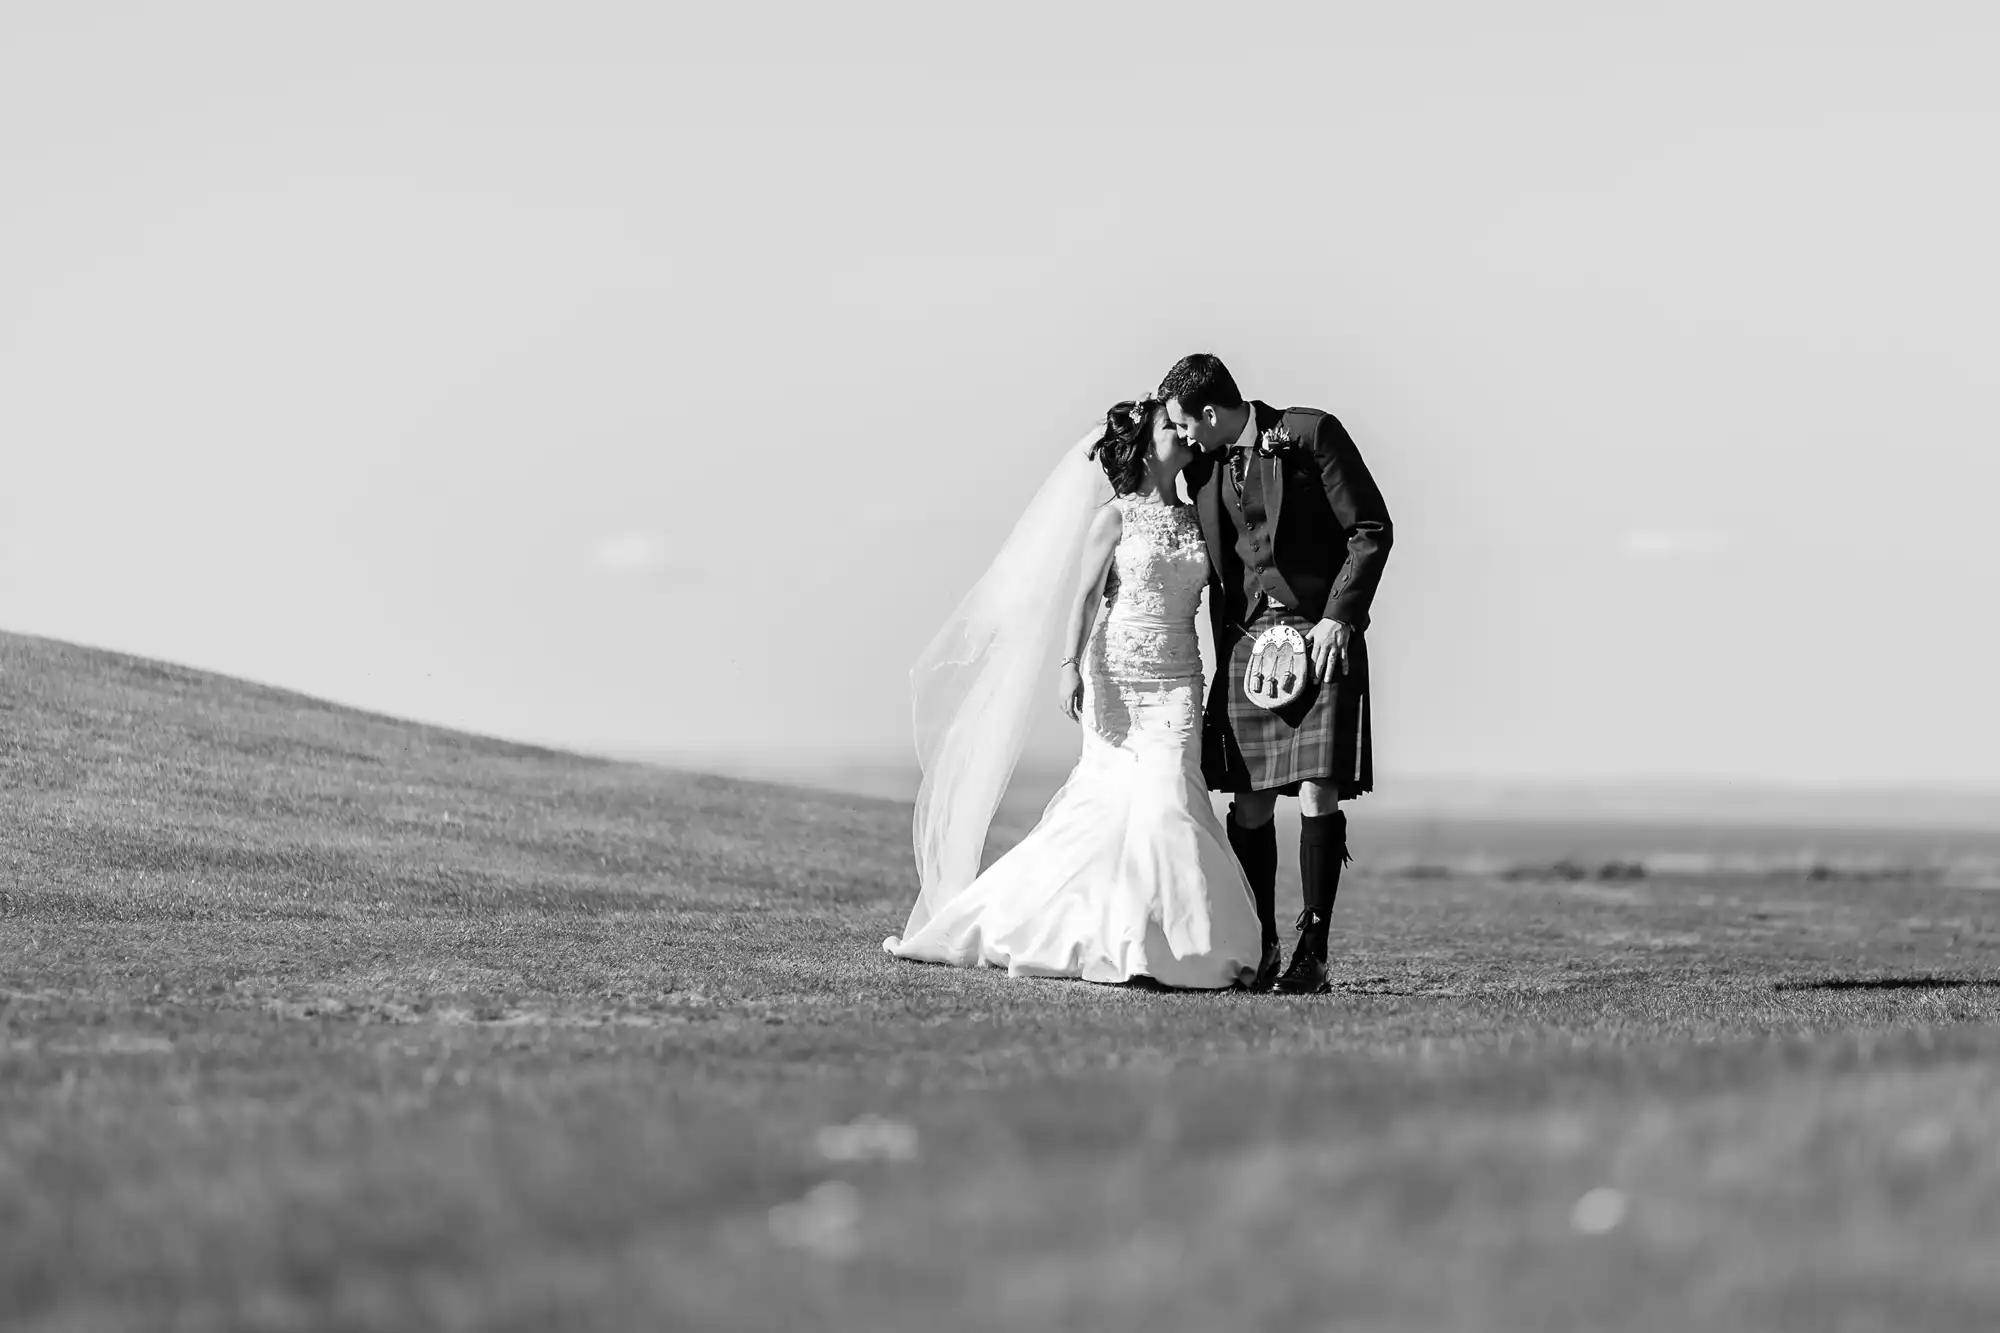 A bride and groom in wedding attire embrace tenderly in a vast, open field, with the groom dressed in a traditional kilt. the image is in black and white.